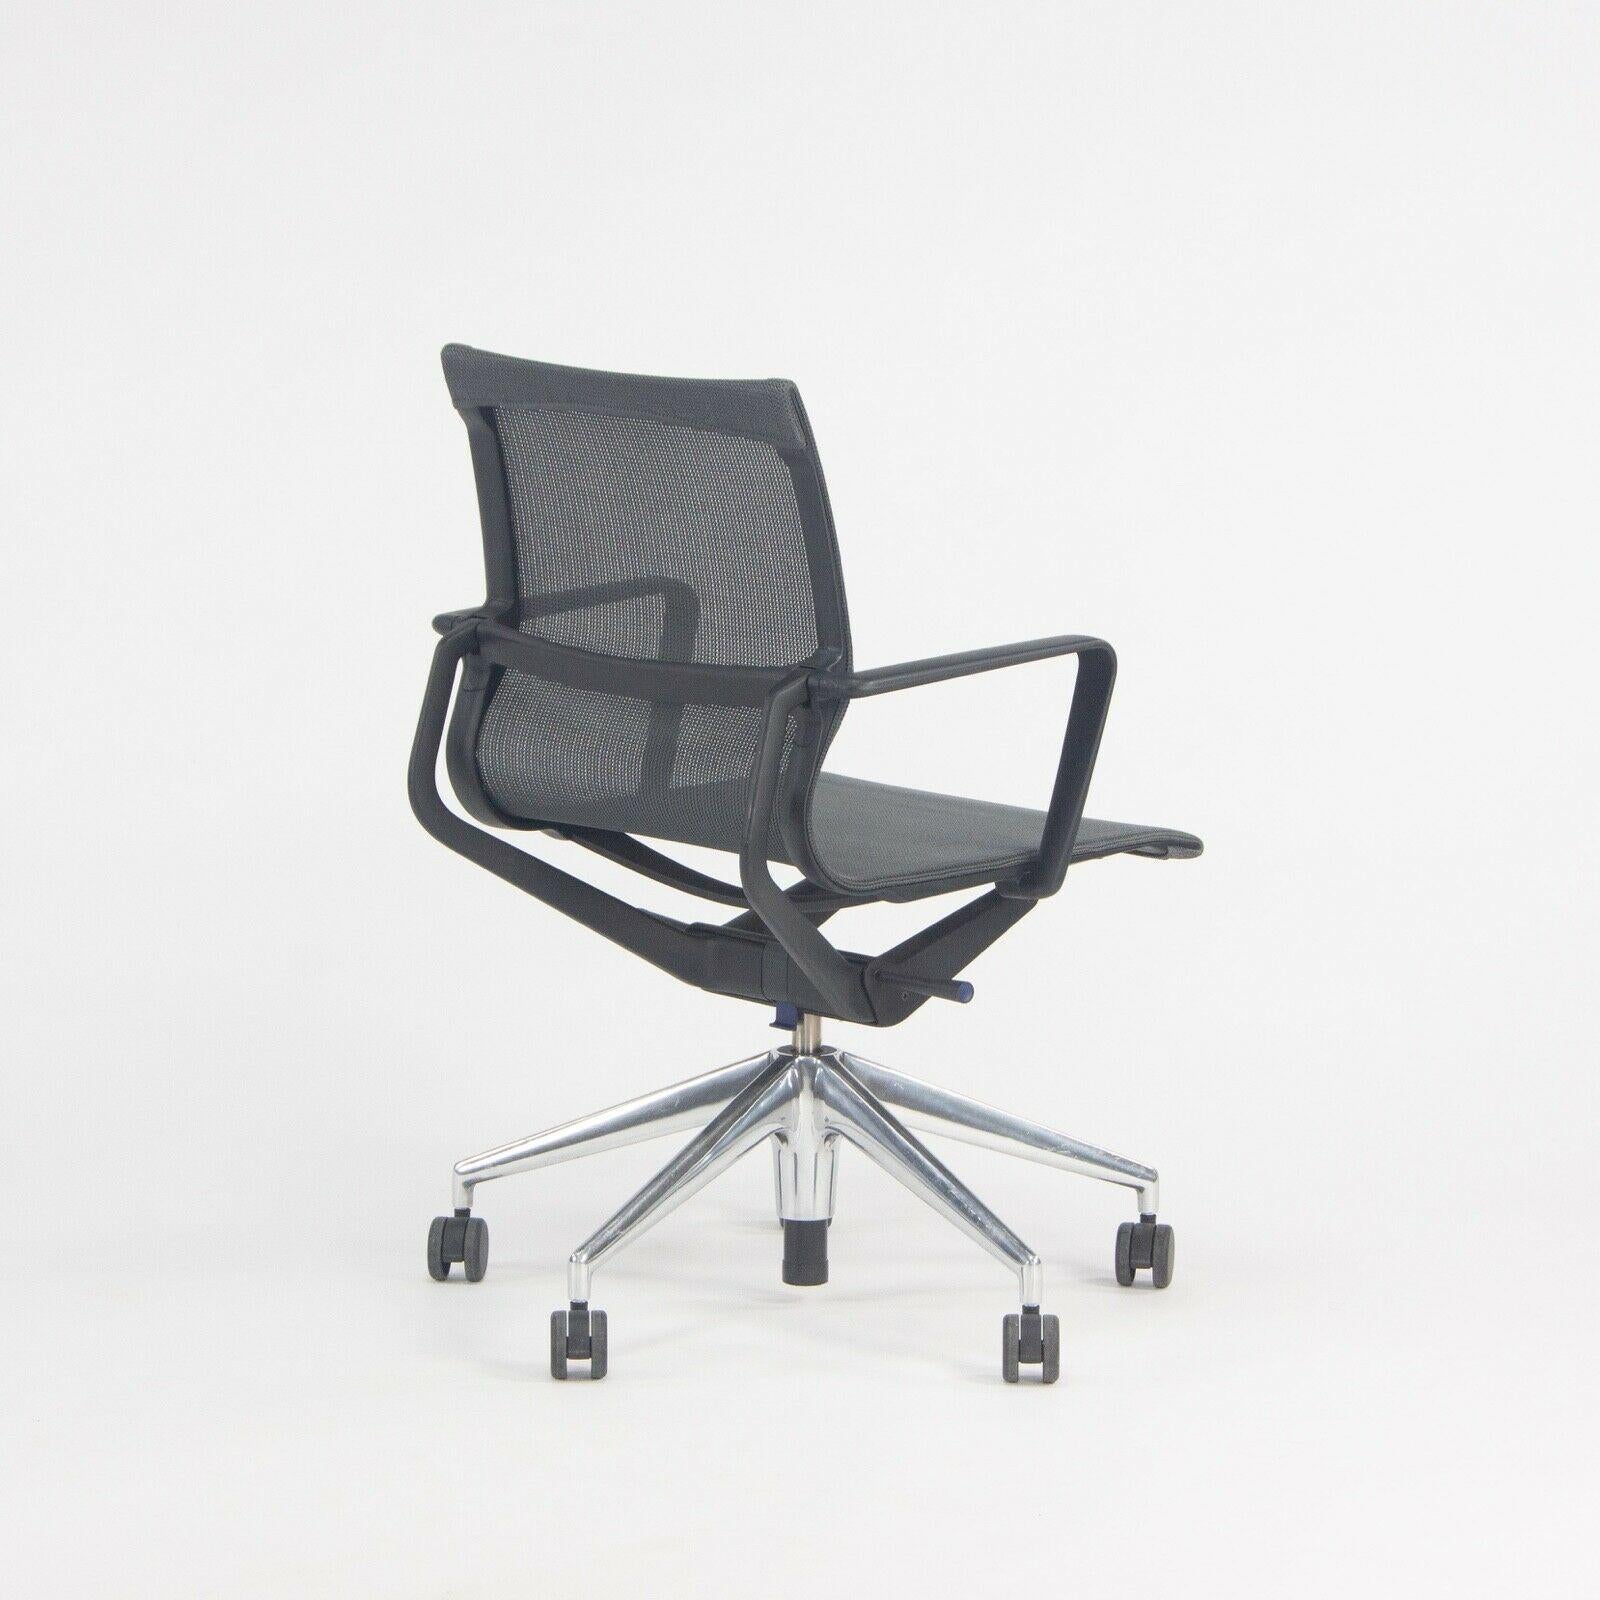 2018 Vitra Physix Rolling Desk Chair by Alberta Meda Gray Mesh Sets Available In Good Condition For Sale In Philadelphia, PA